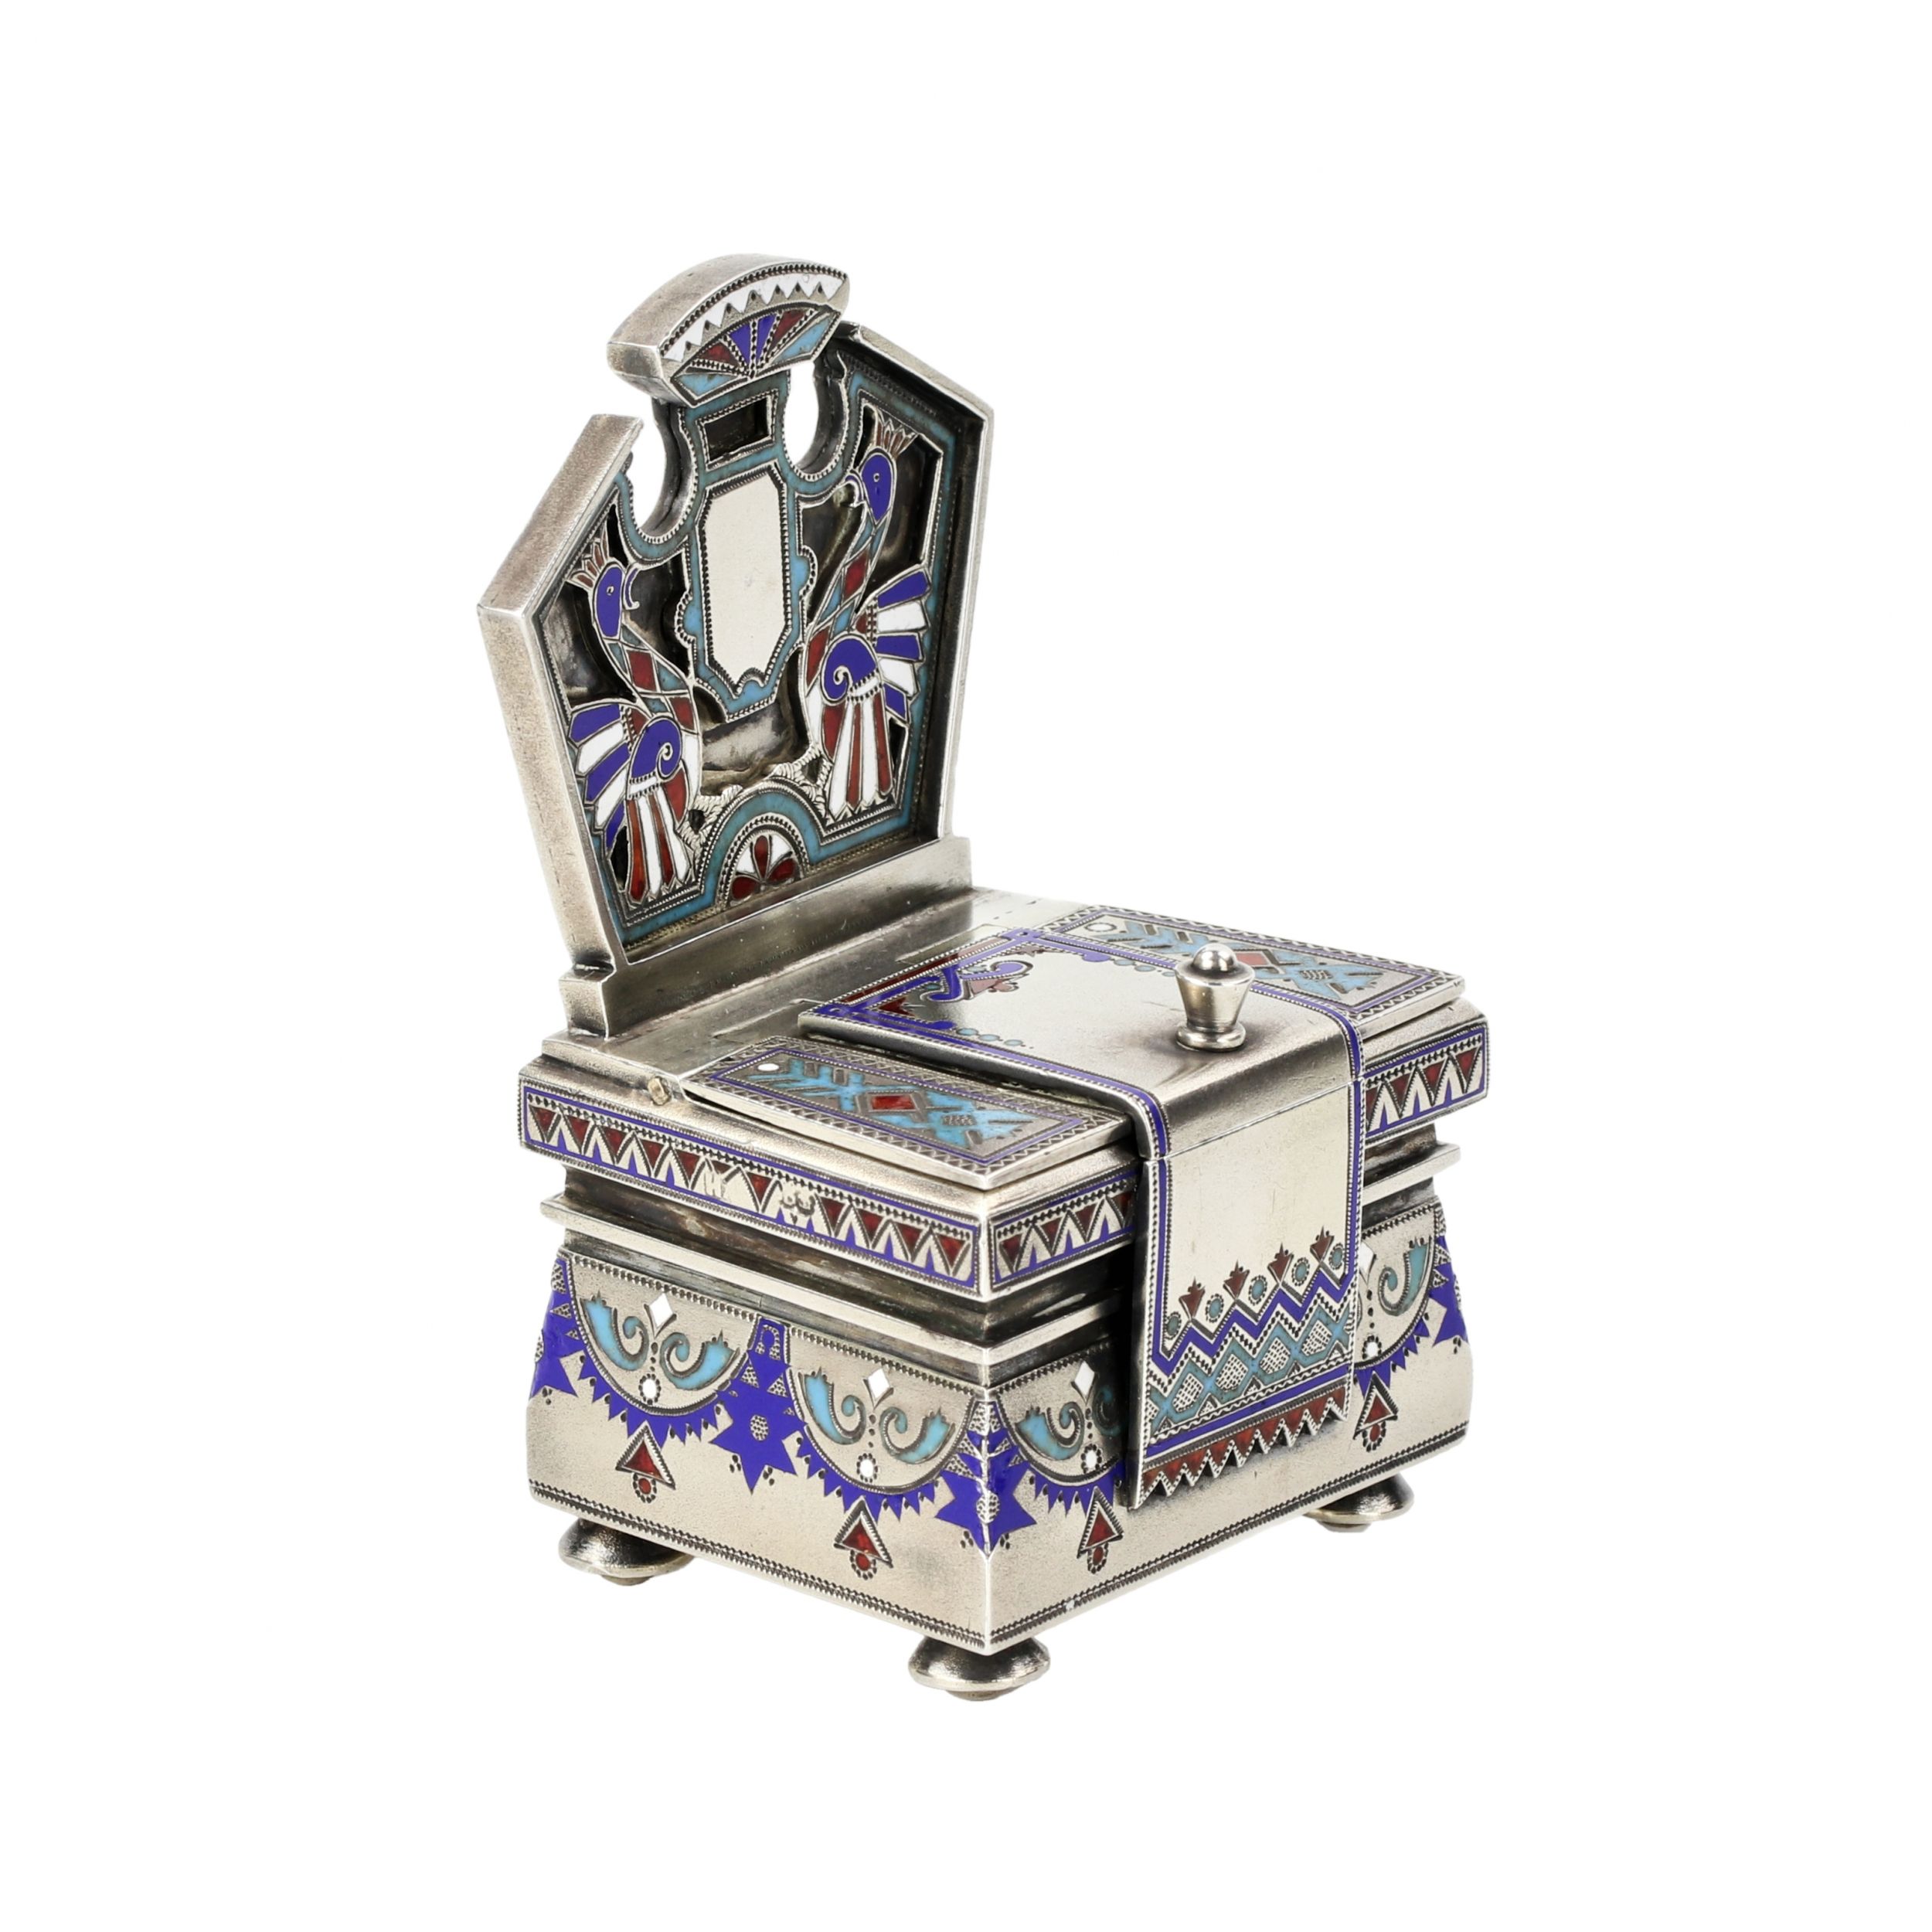 Solid-and-weighty-silver-salt-shaker-throne-from-Ivan-Khlebnikov-Moscow1883-